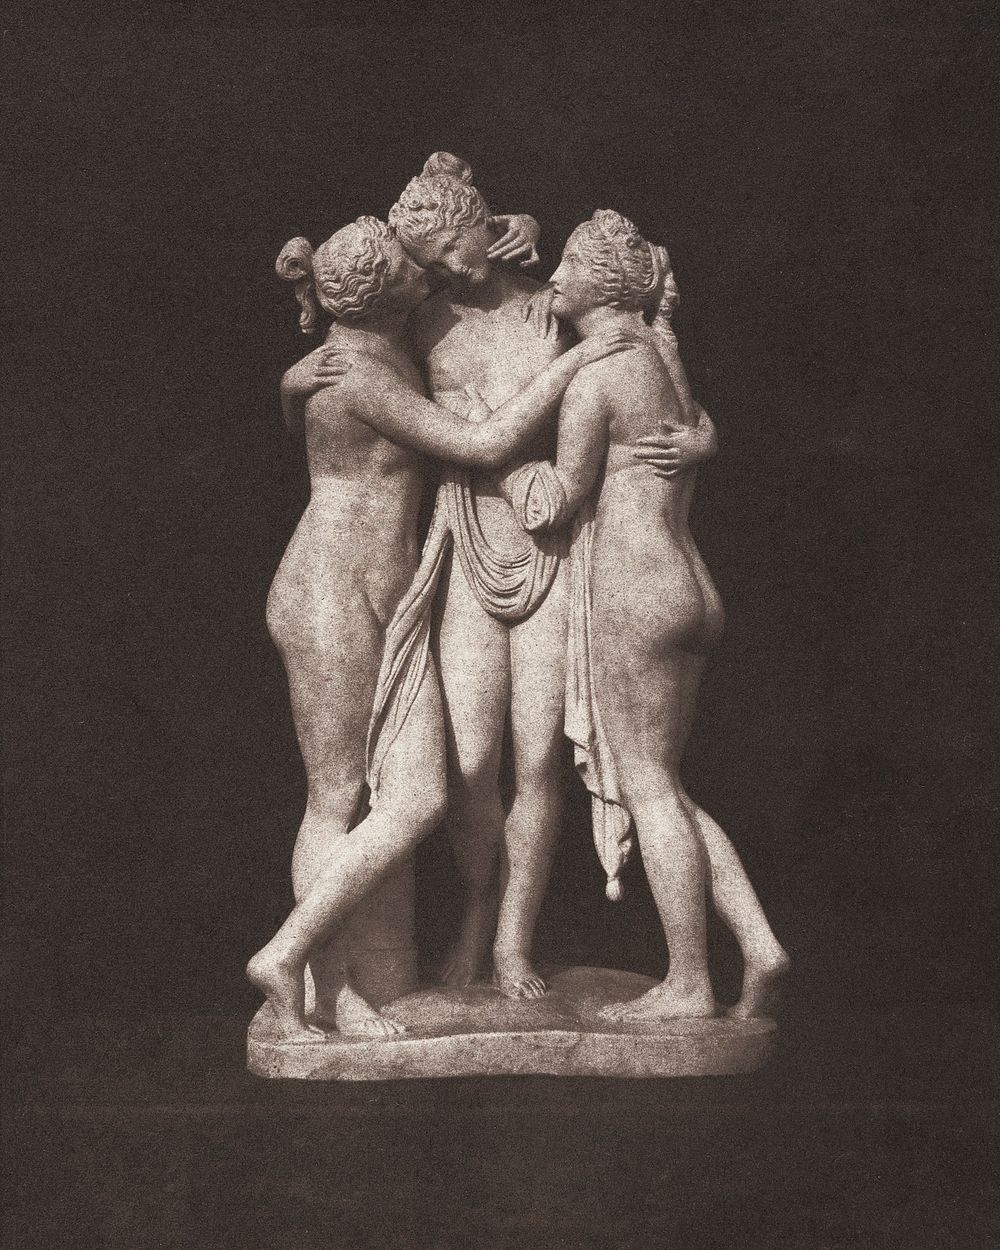 Sensual nude sculpture, Three Graces (1840s) by William Henry Fox Talbot. Original from The MET Museum. Digitally enhanced…